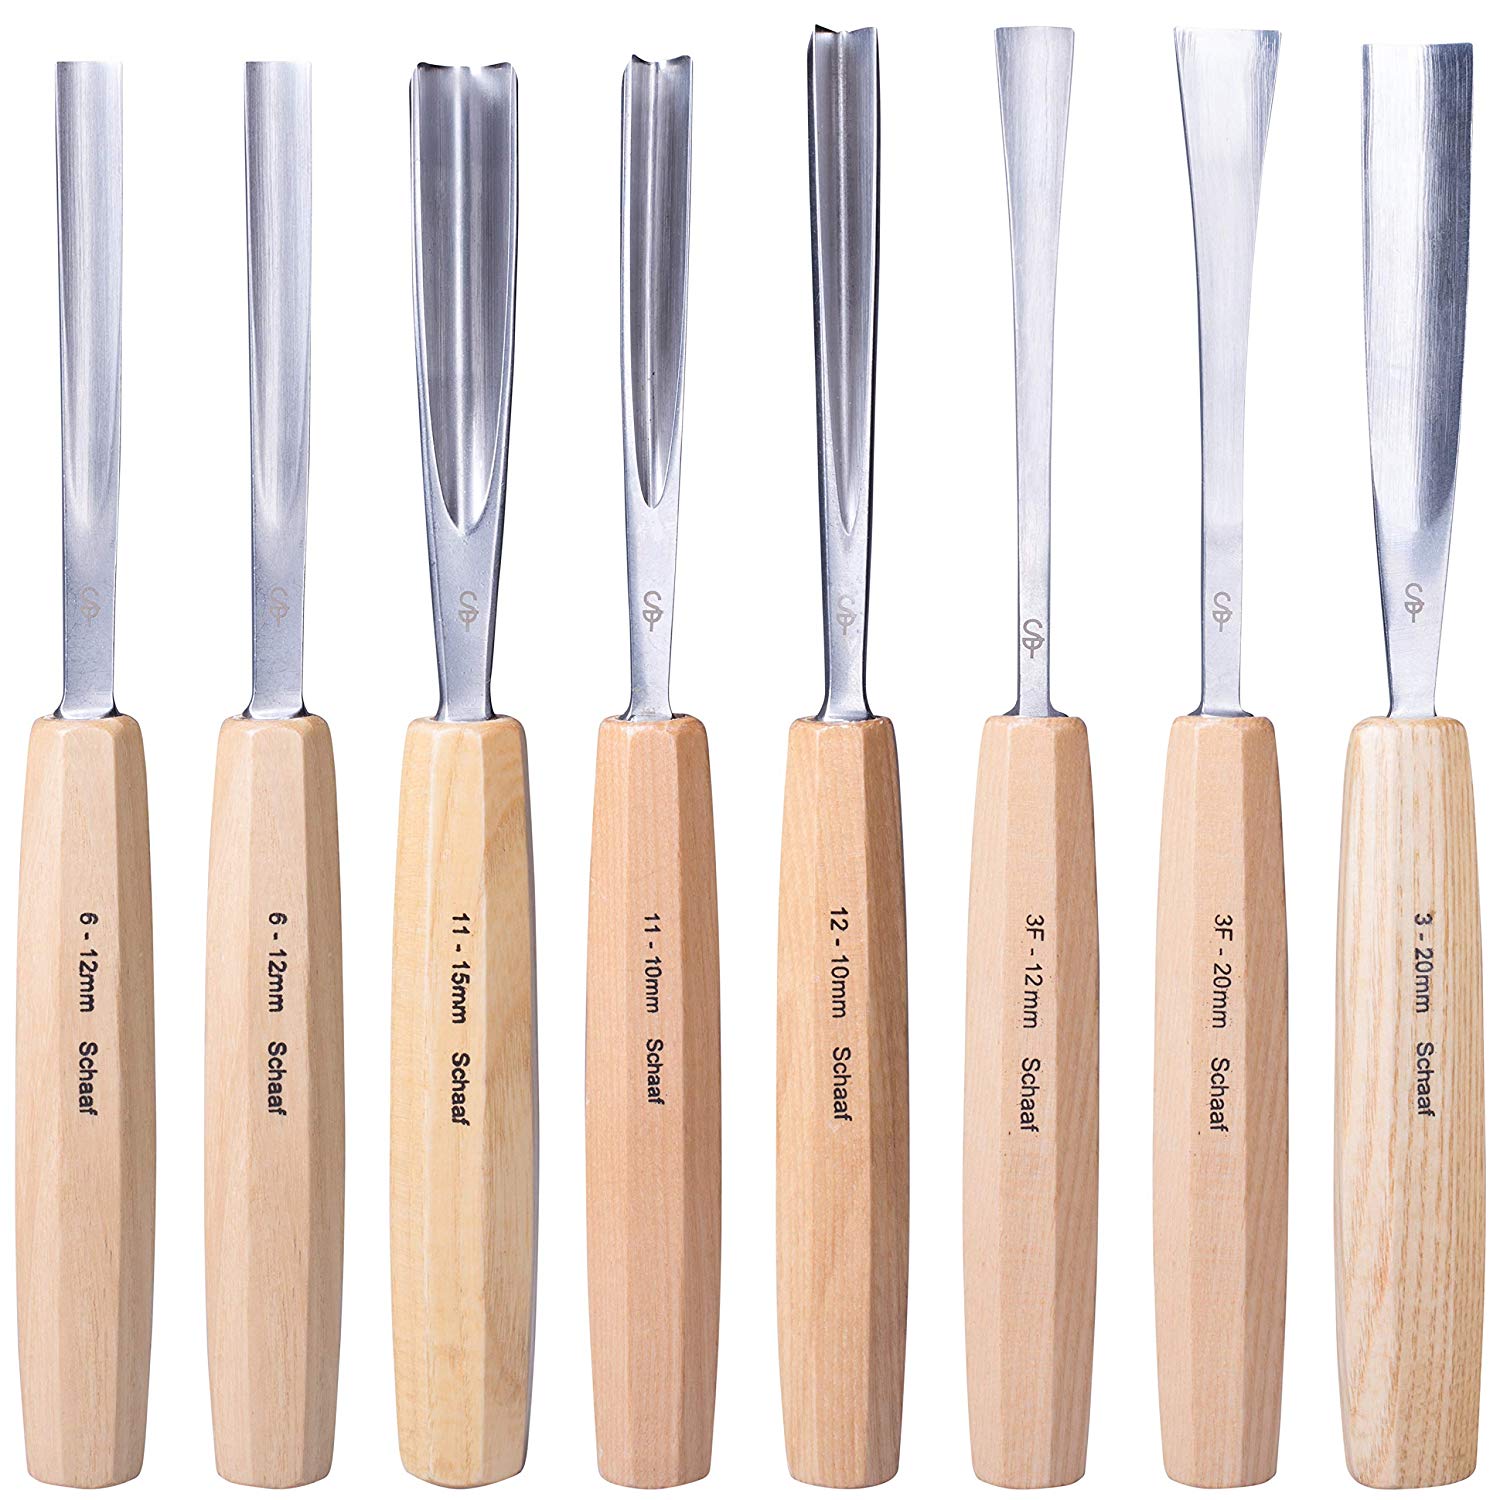 5 Best Wood Carving Tools Sets for Beginners – Schaaf Tools